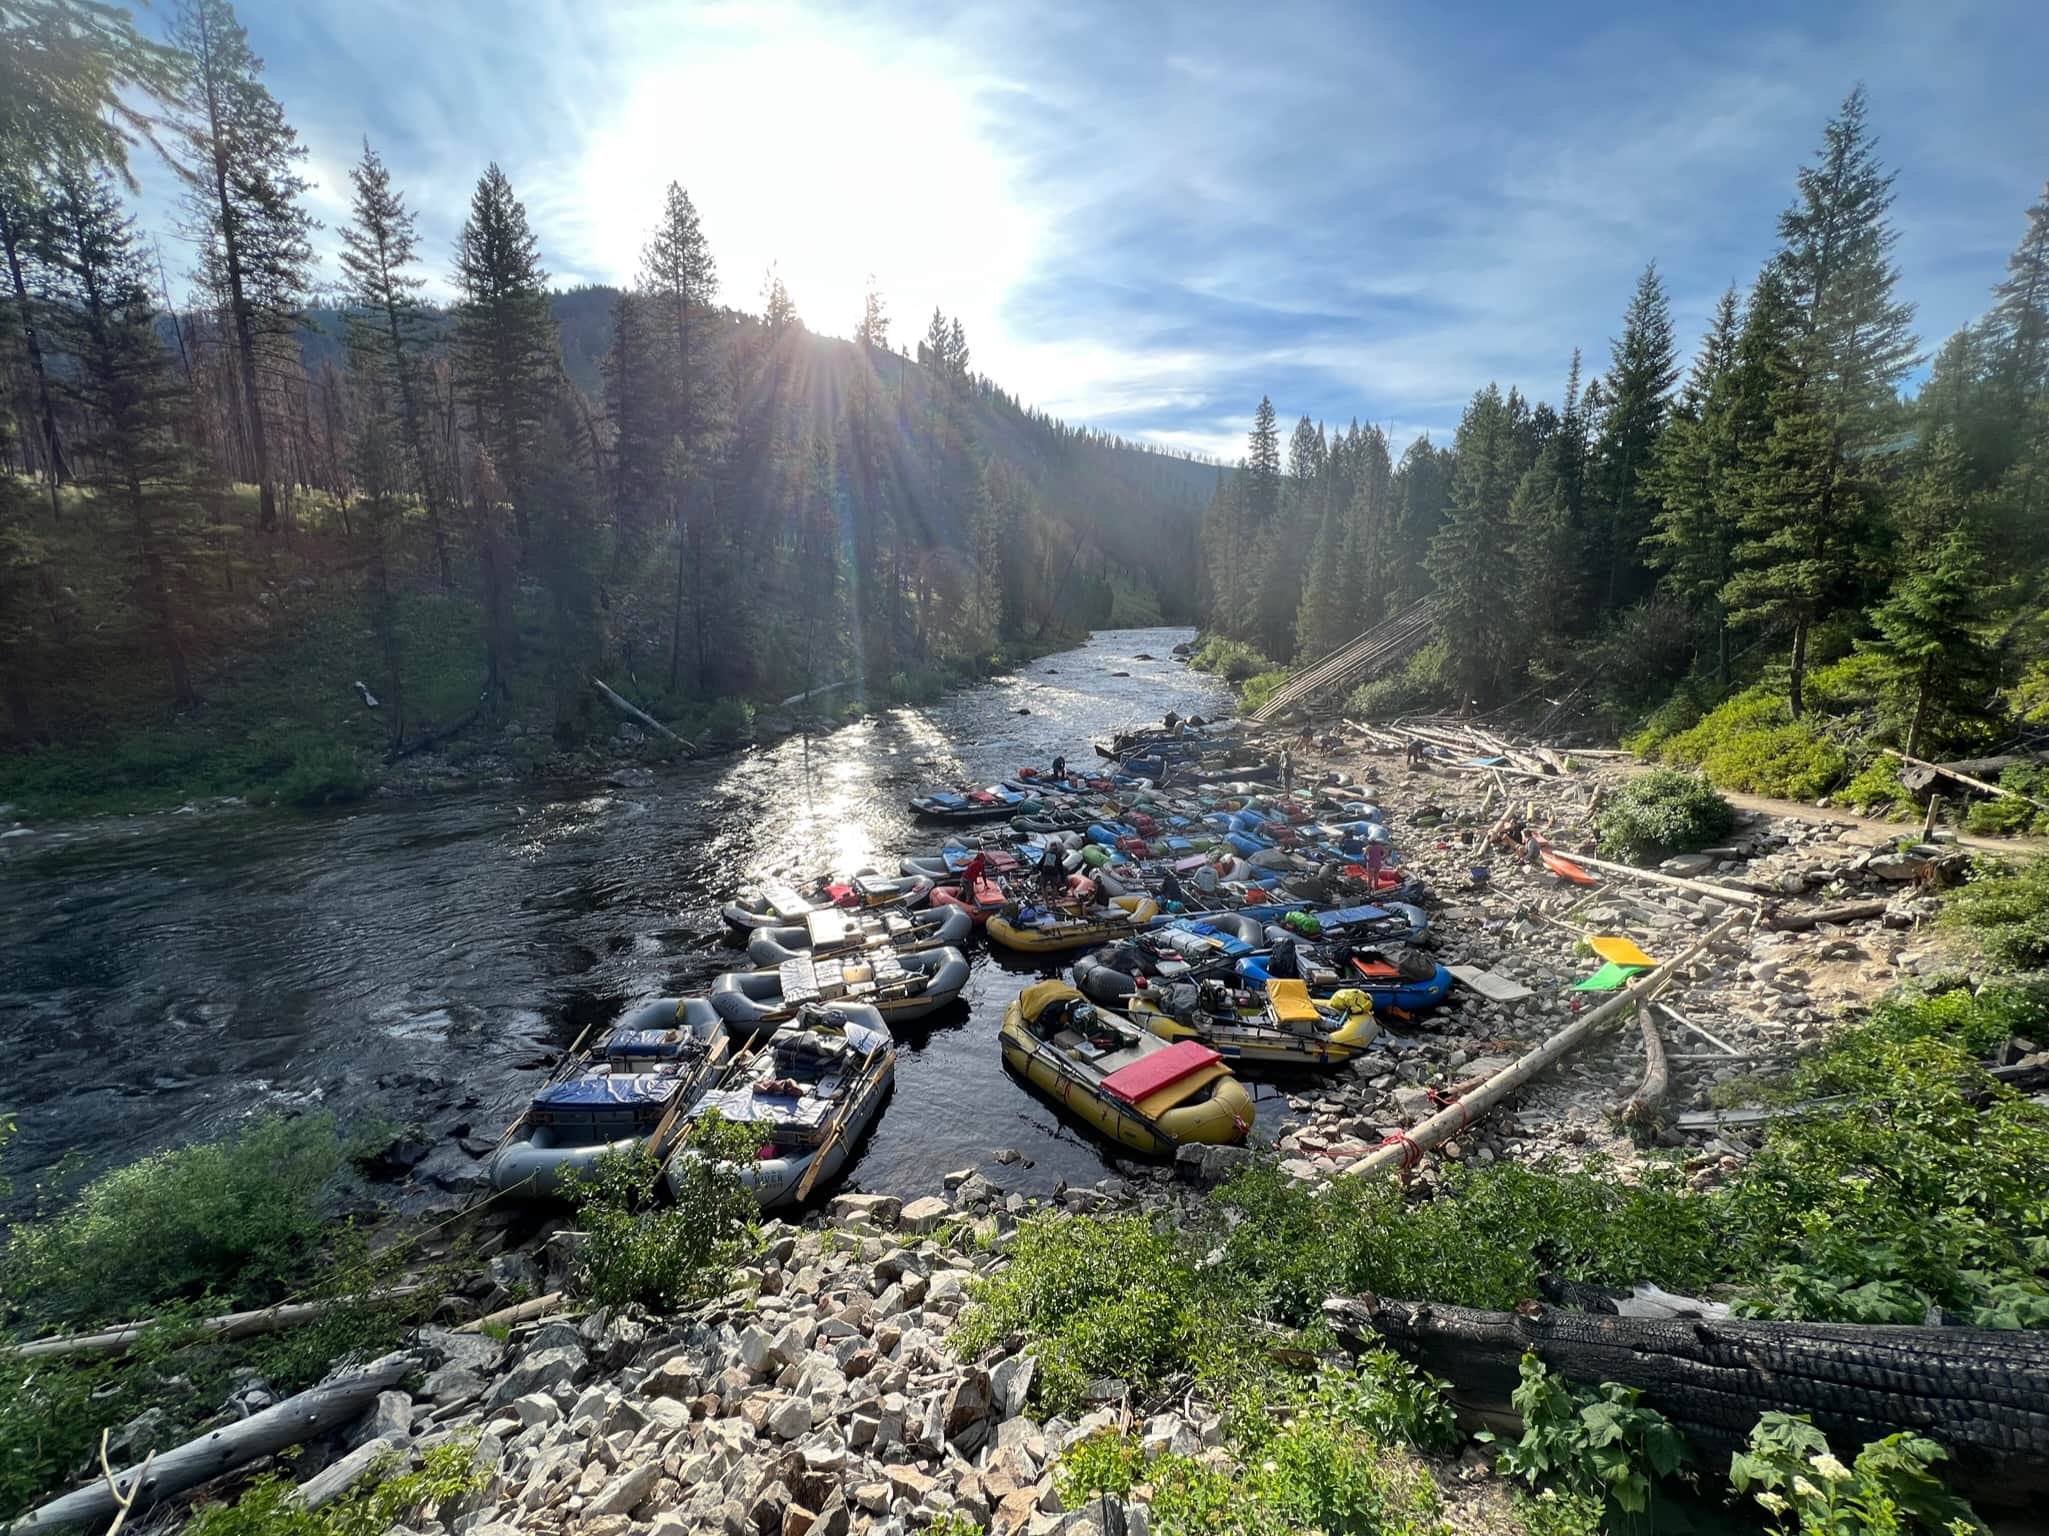 Rafts sit in the river before a long day